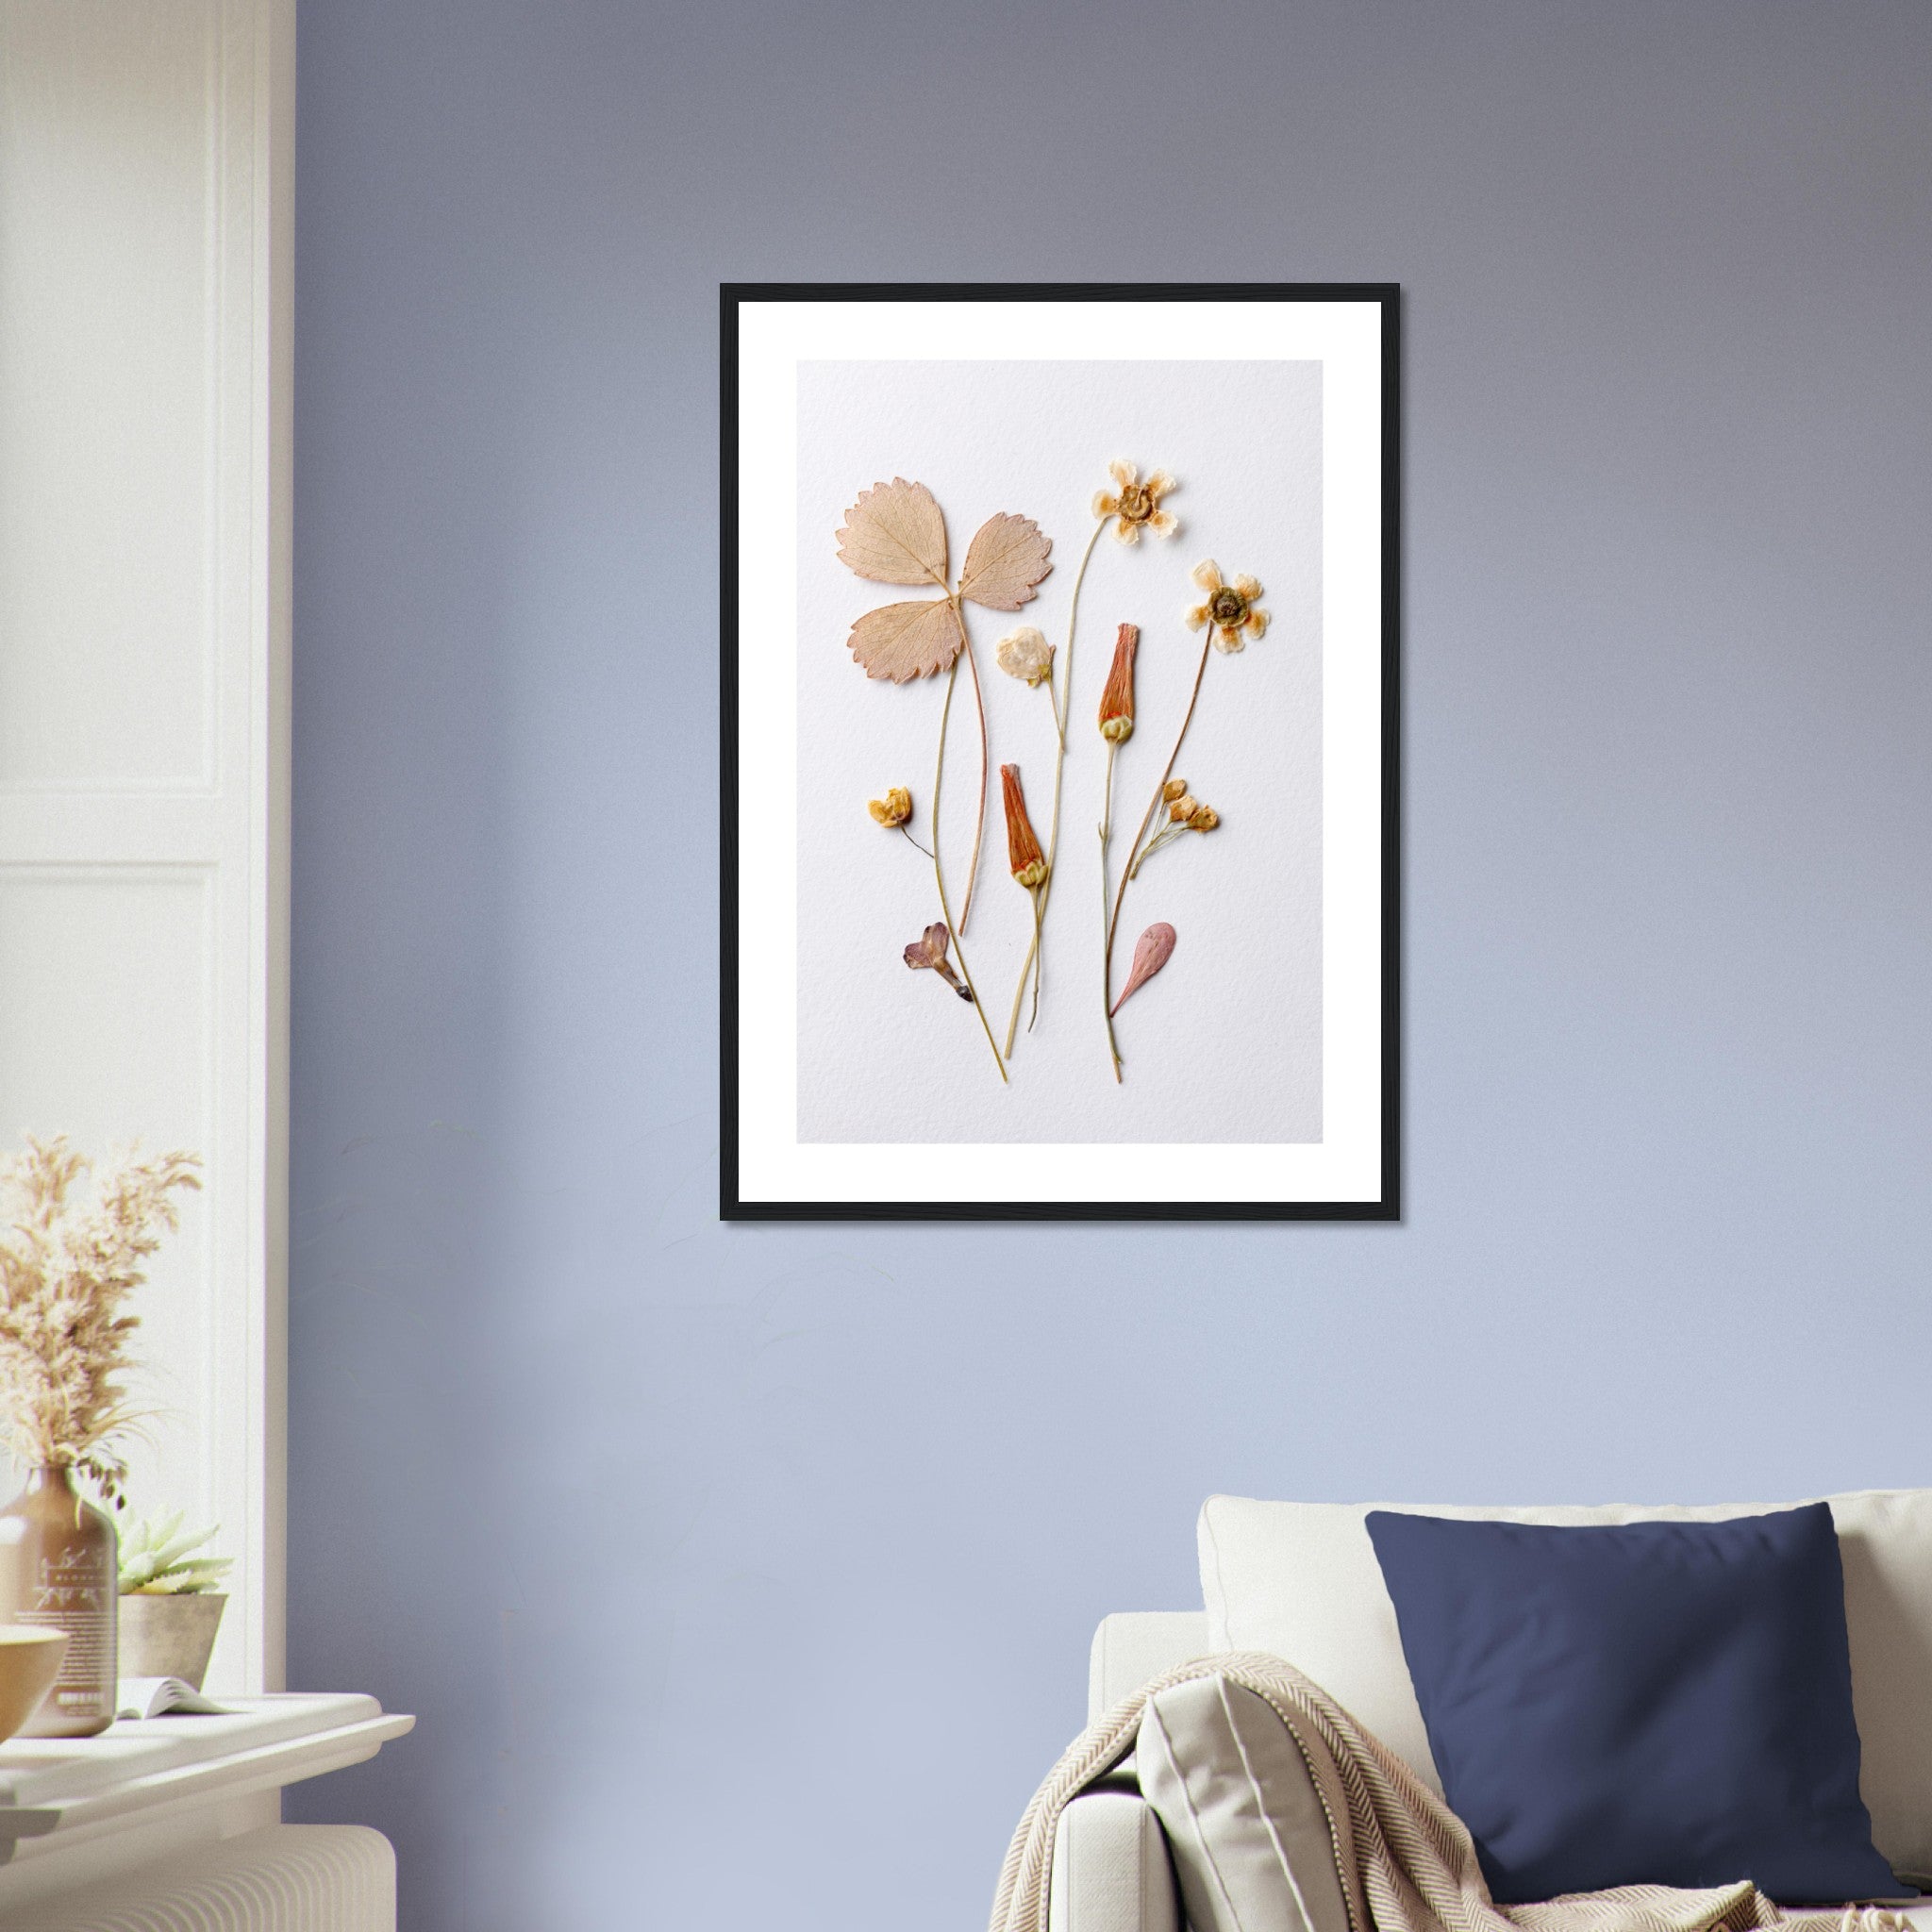 Dried Flowers On Textured Paper 2 Poster